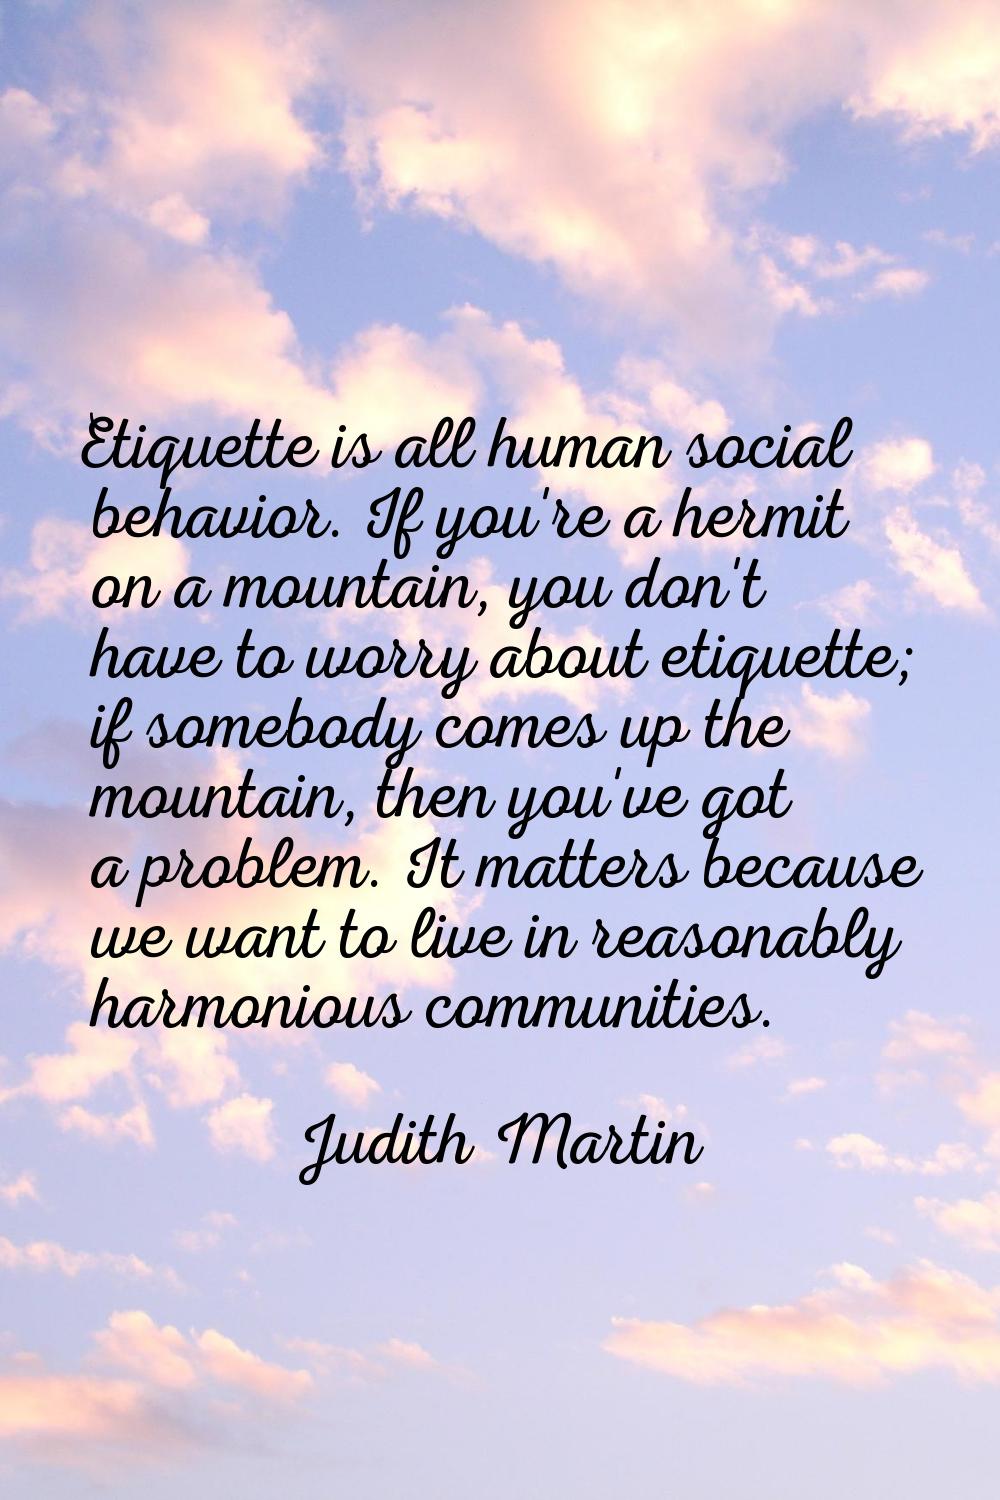 Etiquette is all human social behavior. If you're a hermit on a mountain, you don't have to worry a